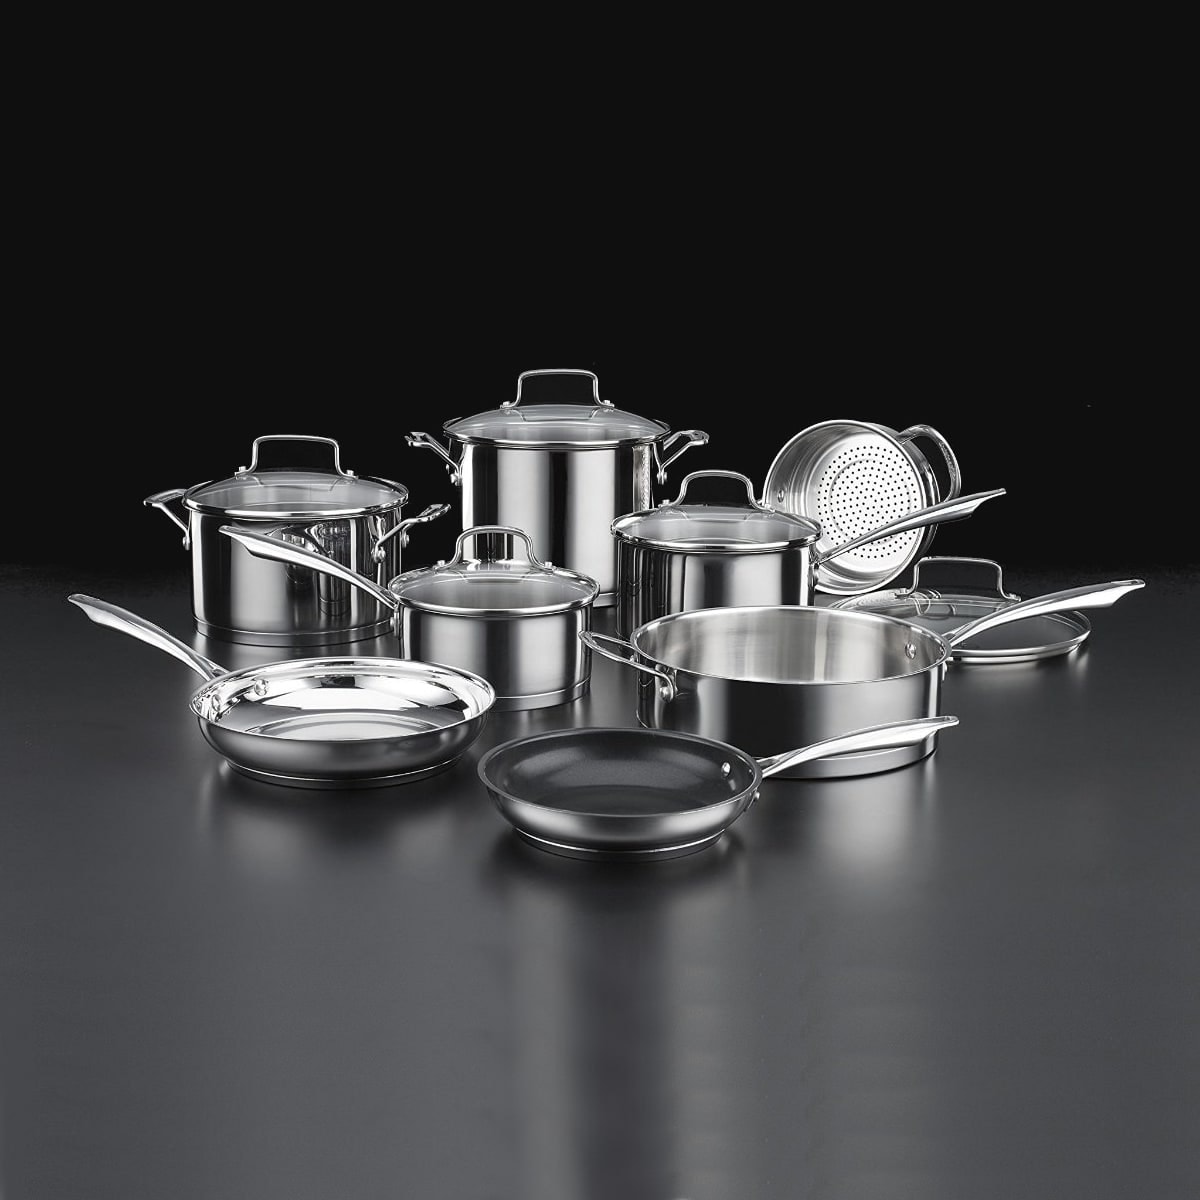 https://ak1.ostkcdn.com/images/products/is/images/direct/68657a7f5706677daeaf4c98f1dcce7bd528d059/Cuisinart-89-13-13-Piece-Professional-Stainless-Cookware-Set%2C-Stainless-Steel.jpg